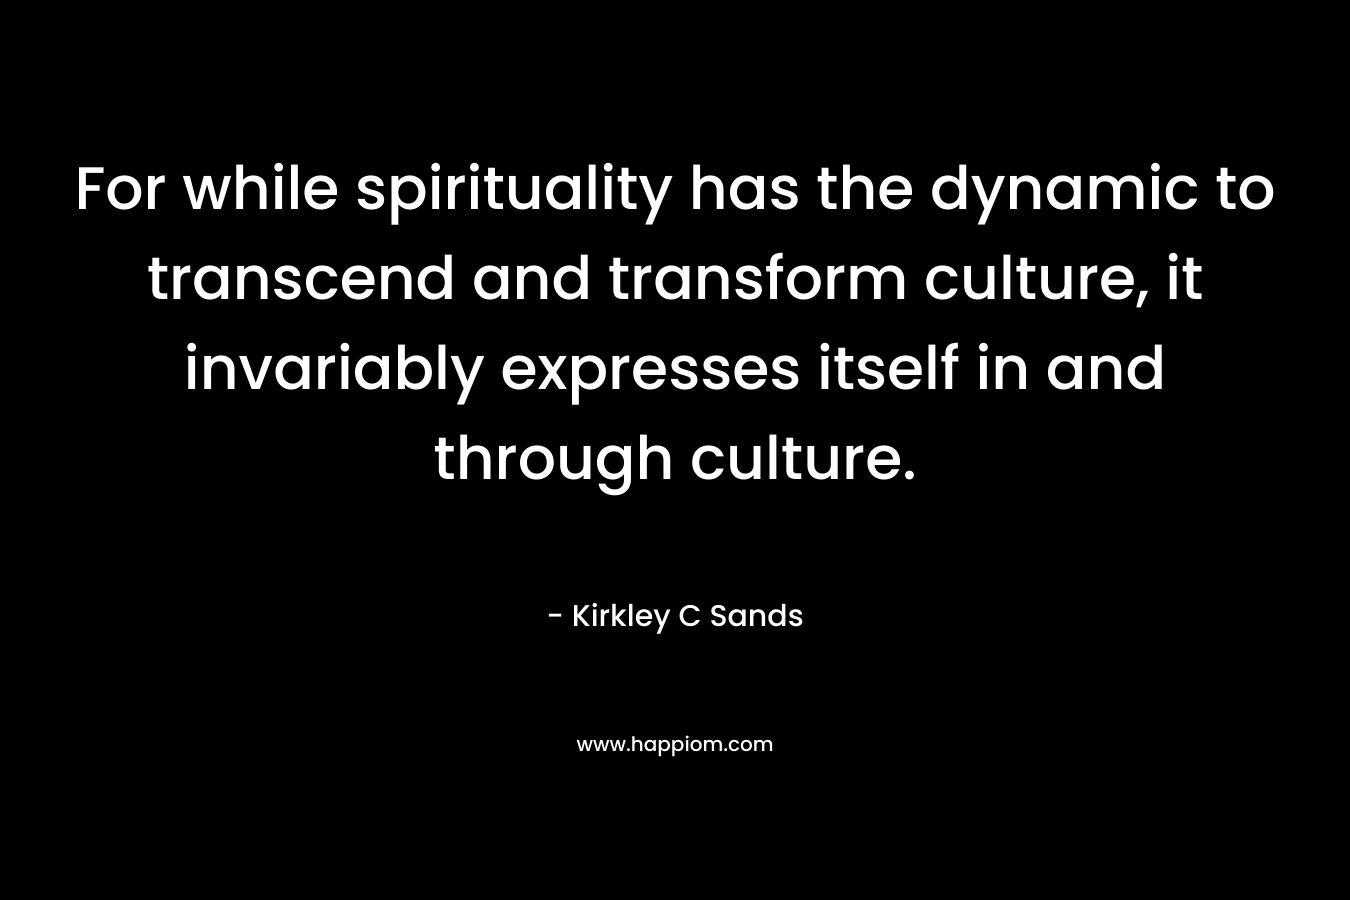 For while spirituality has the dynamic to transcend and transform culture, it invariably expresses itself in and through culture.